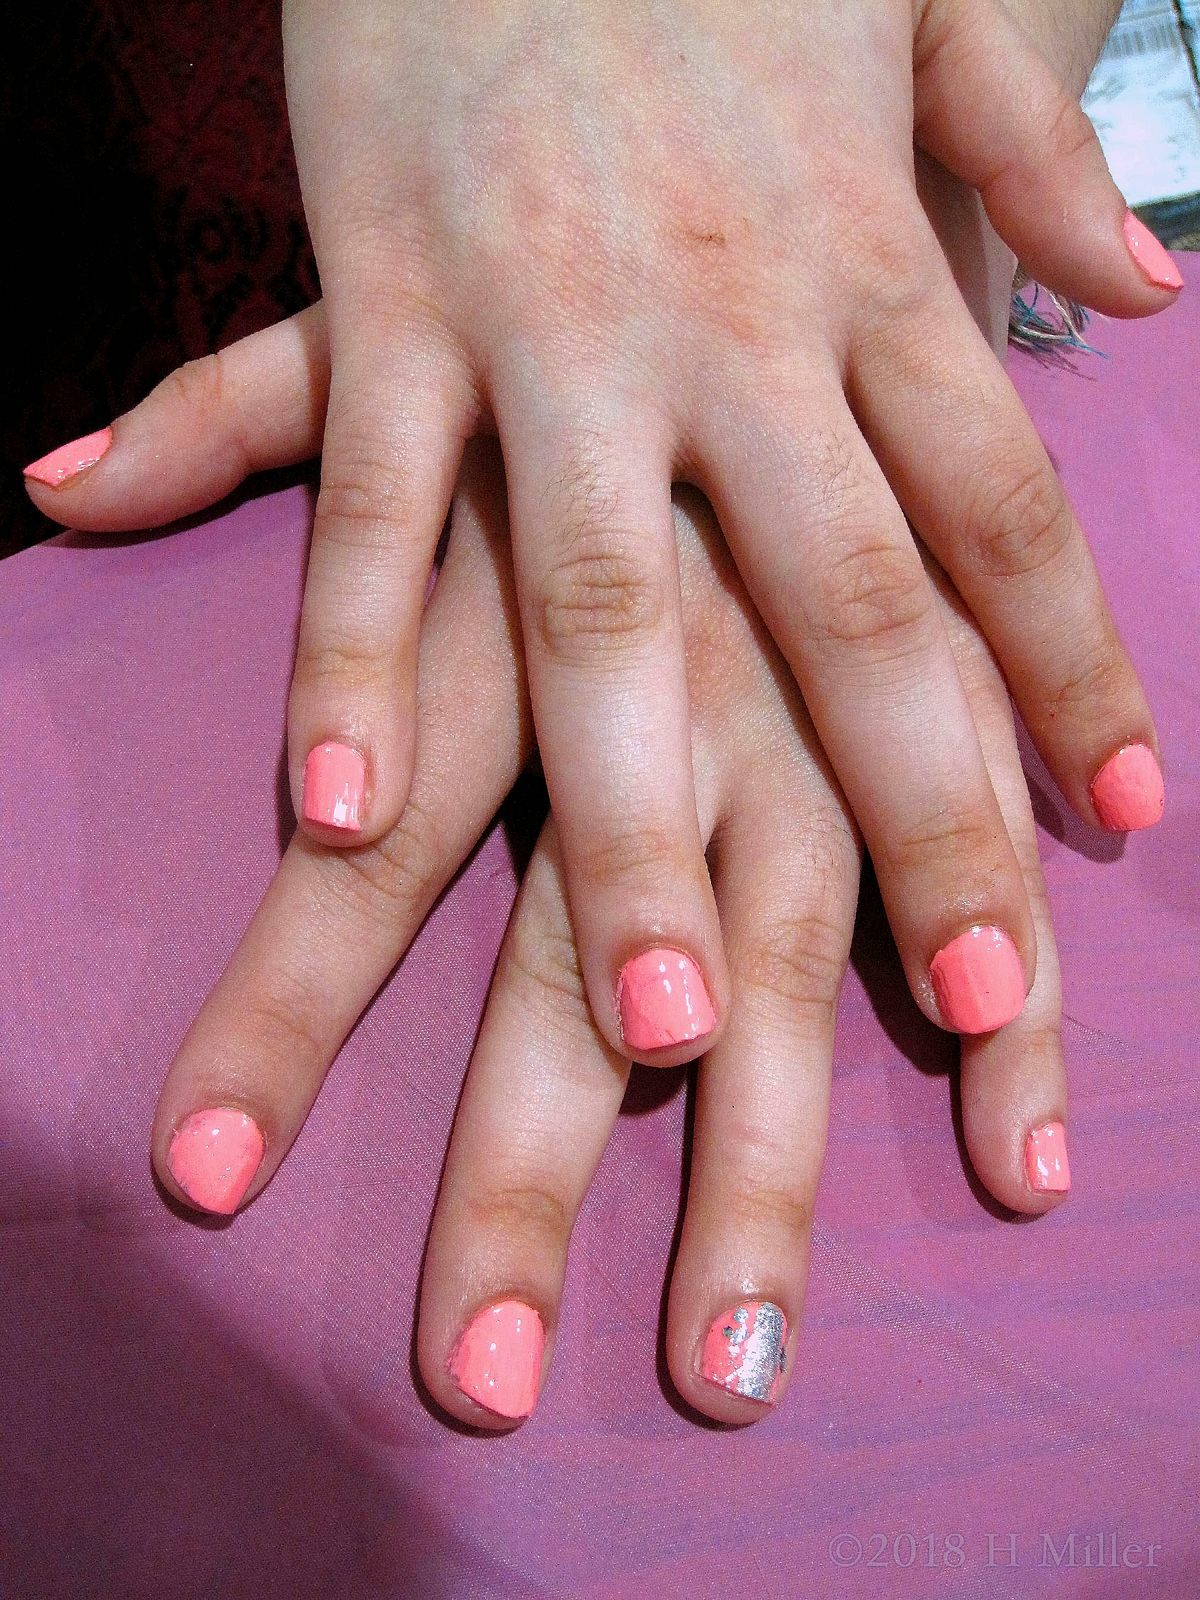 What A Pretty Nail Polish Color For Her Kids Manicure! 